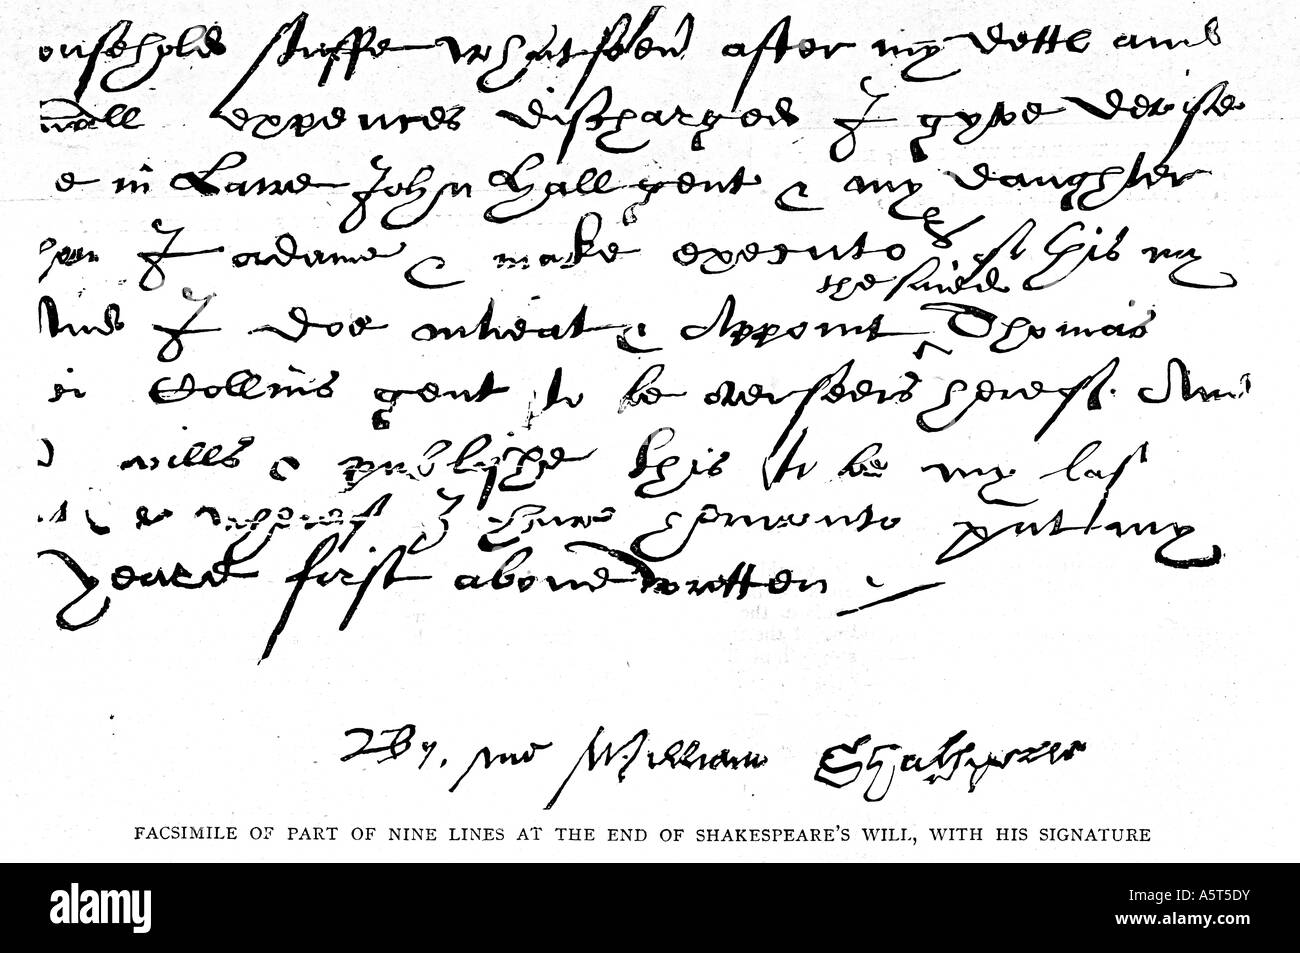 Shakespeares Will The last nine lines of the will of William Shakespeare and his signature published after he died in 1616 Stock Photo